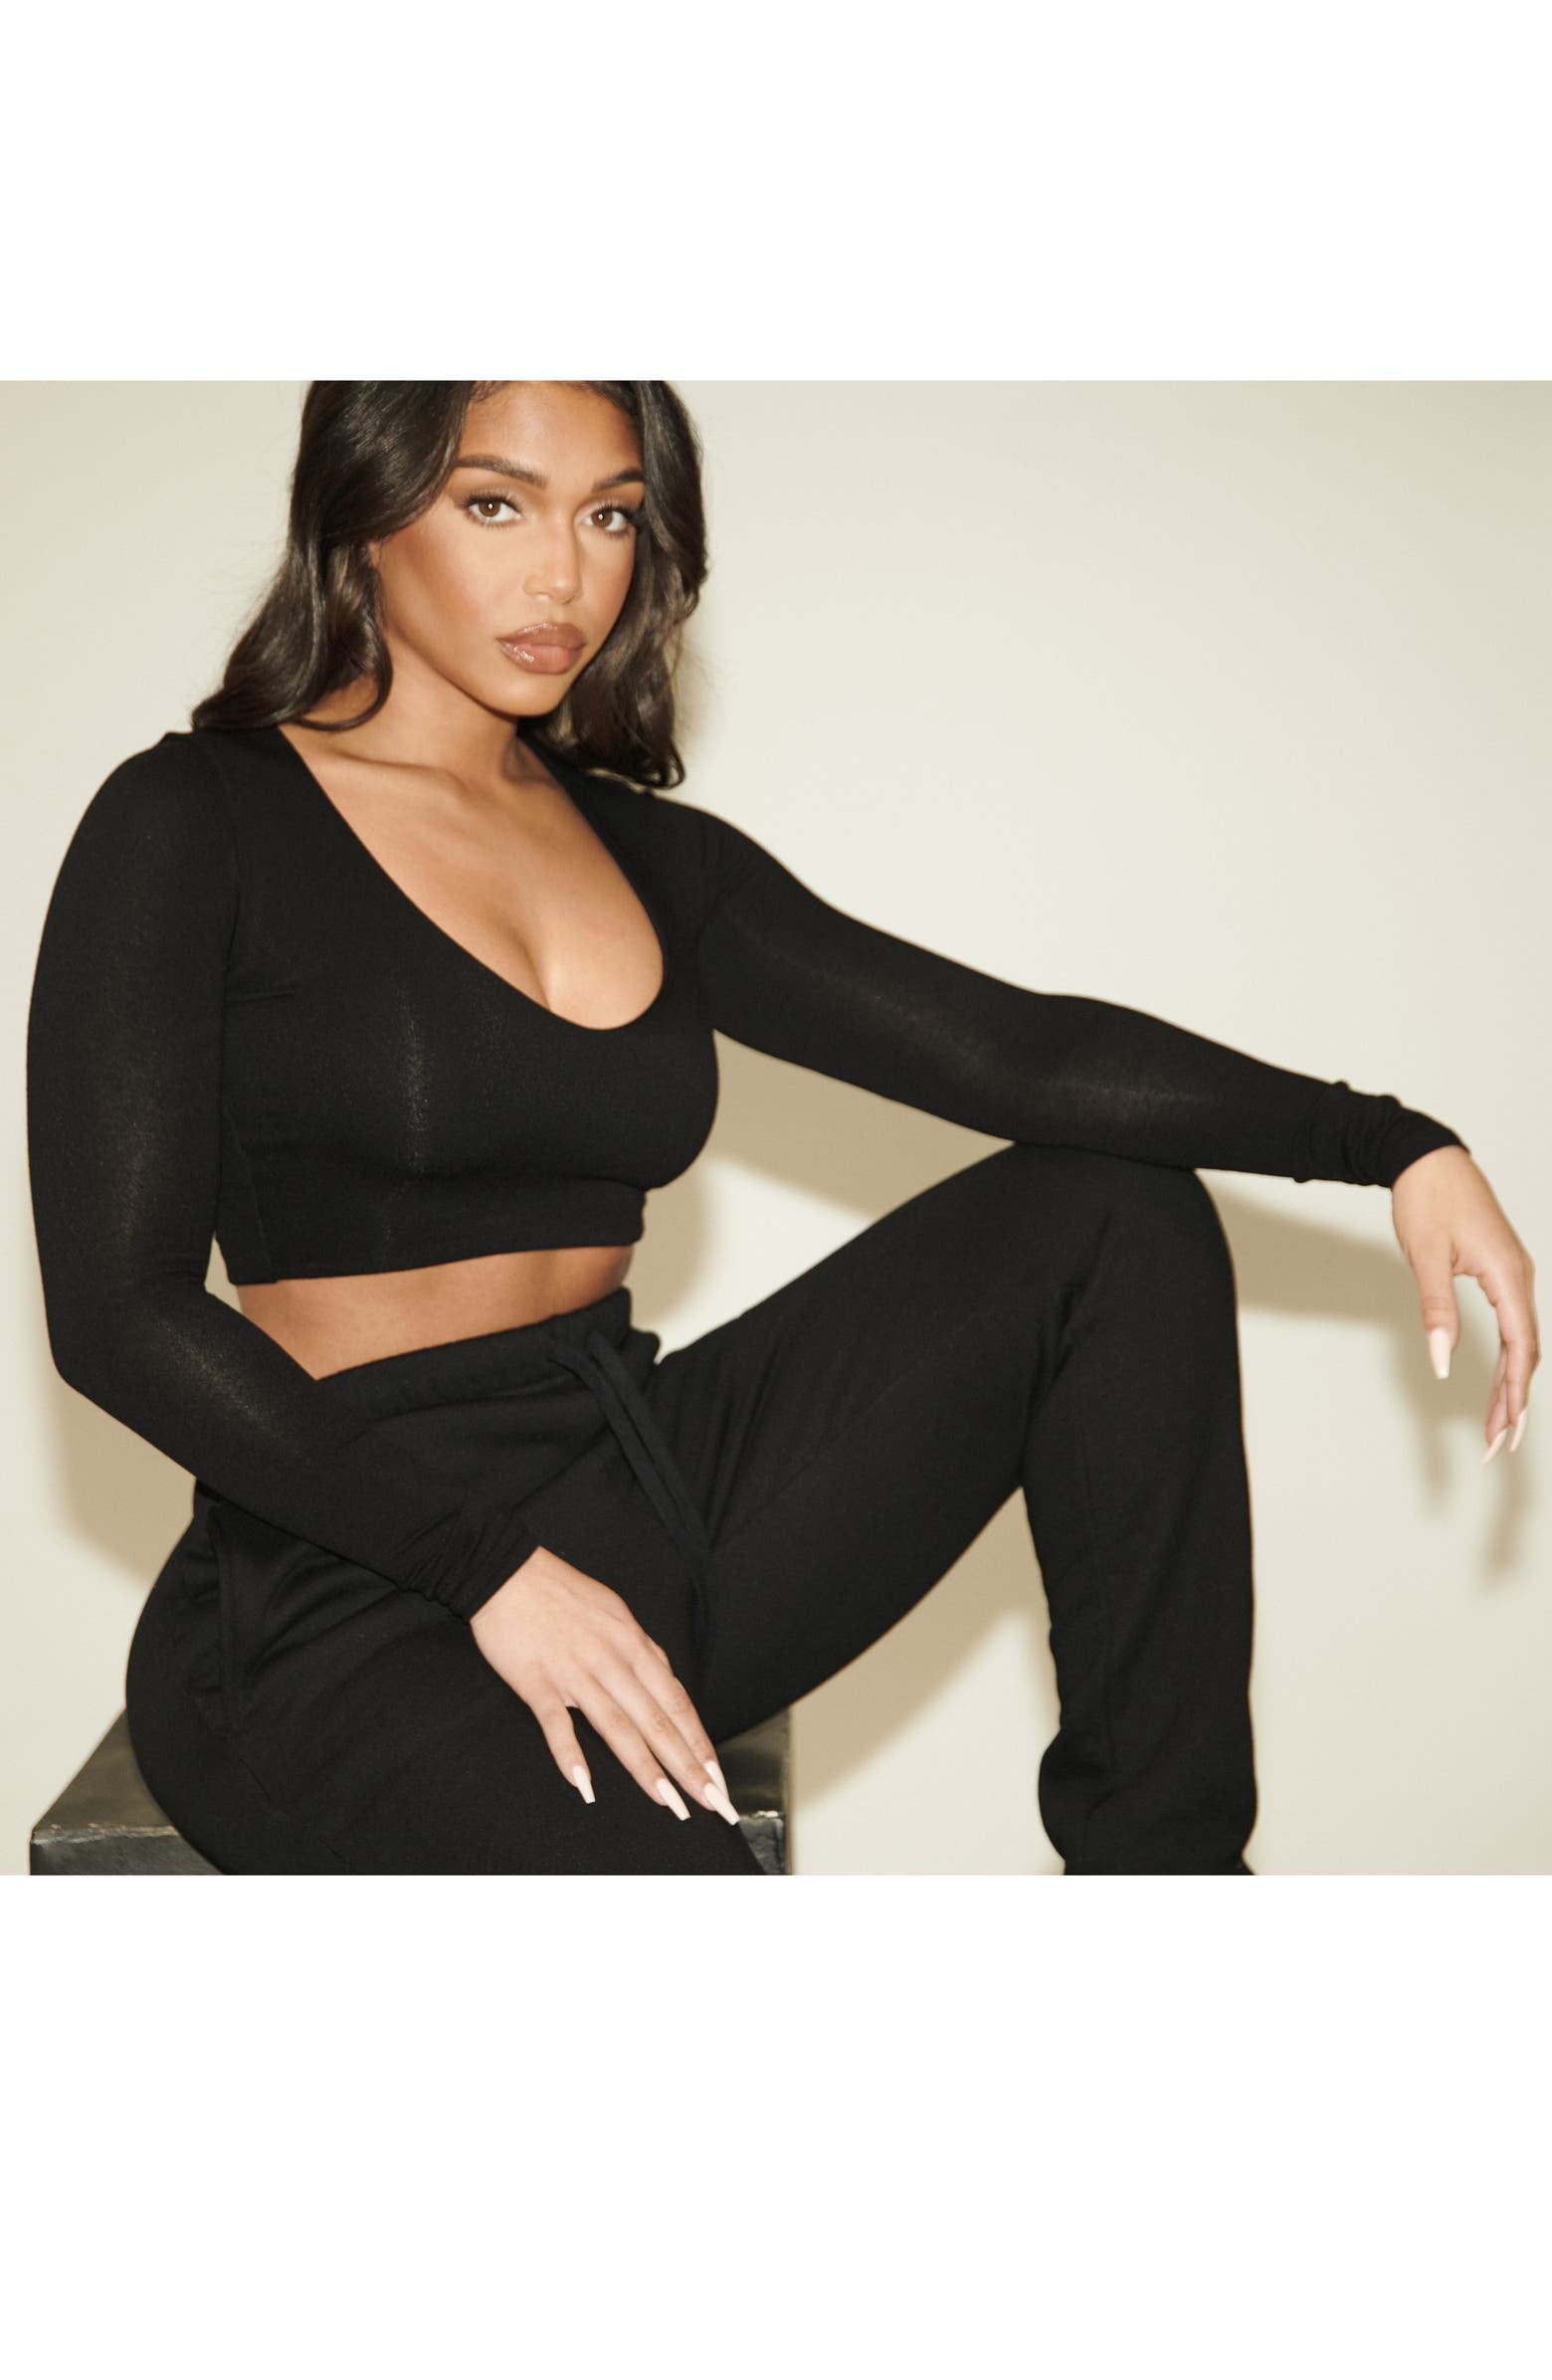 Naked Wardrobe x Lori Harvey Scoop Neck Crop Top, Lori Harvey's Naked  Wardrobe Collab Is Available at Nordstrom and Selling Fast!